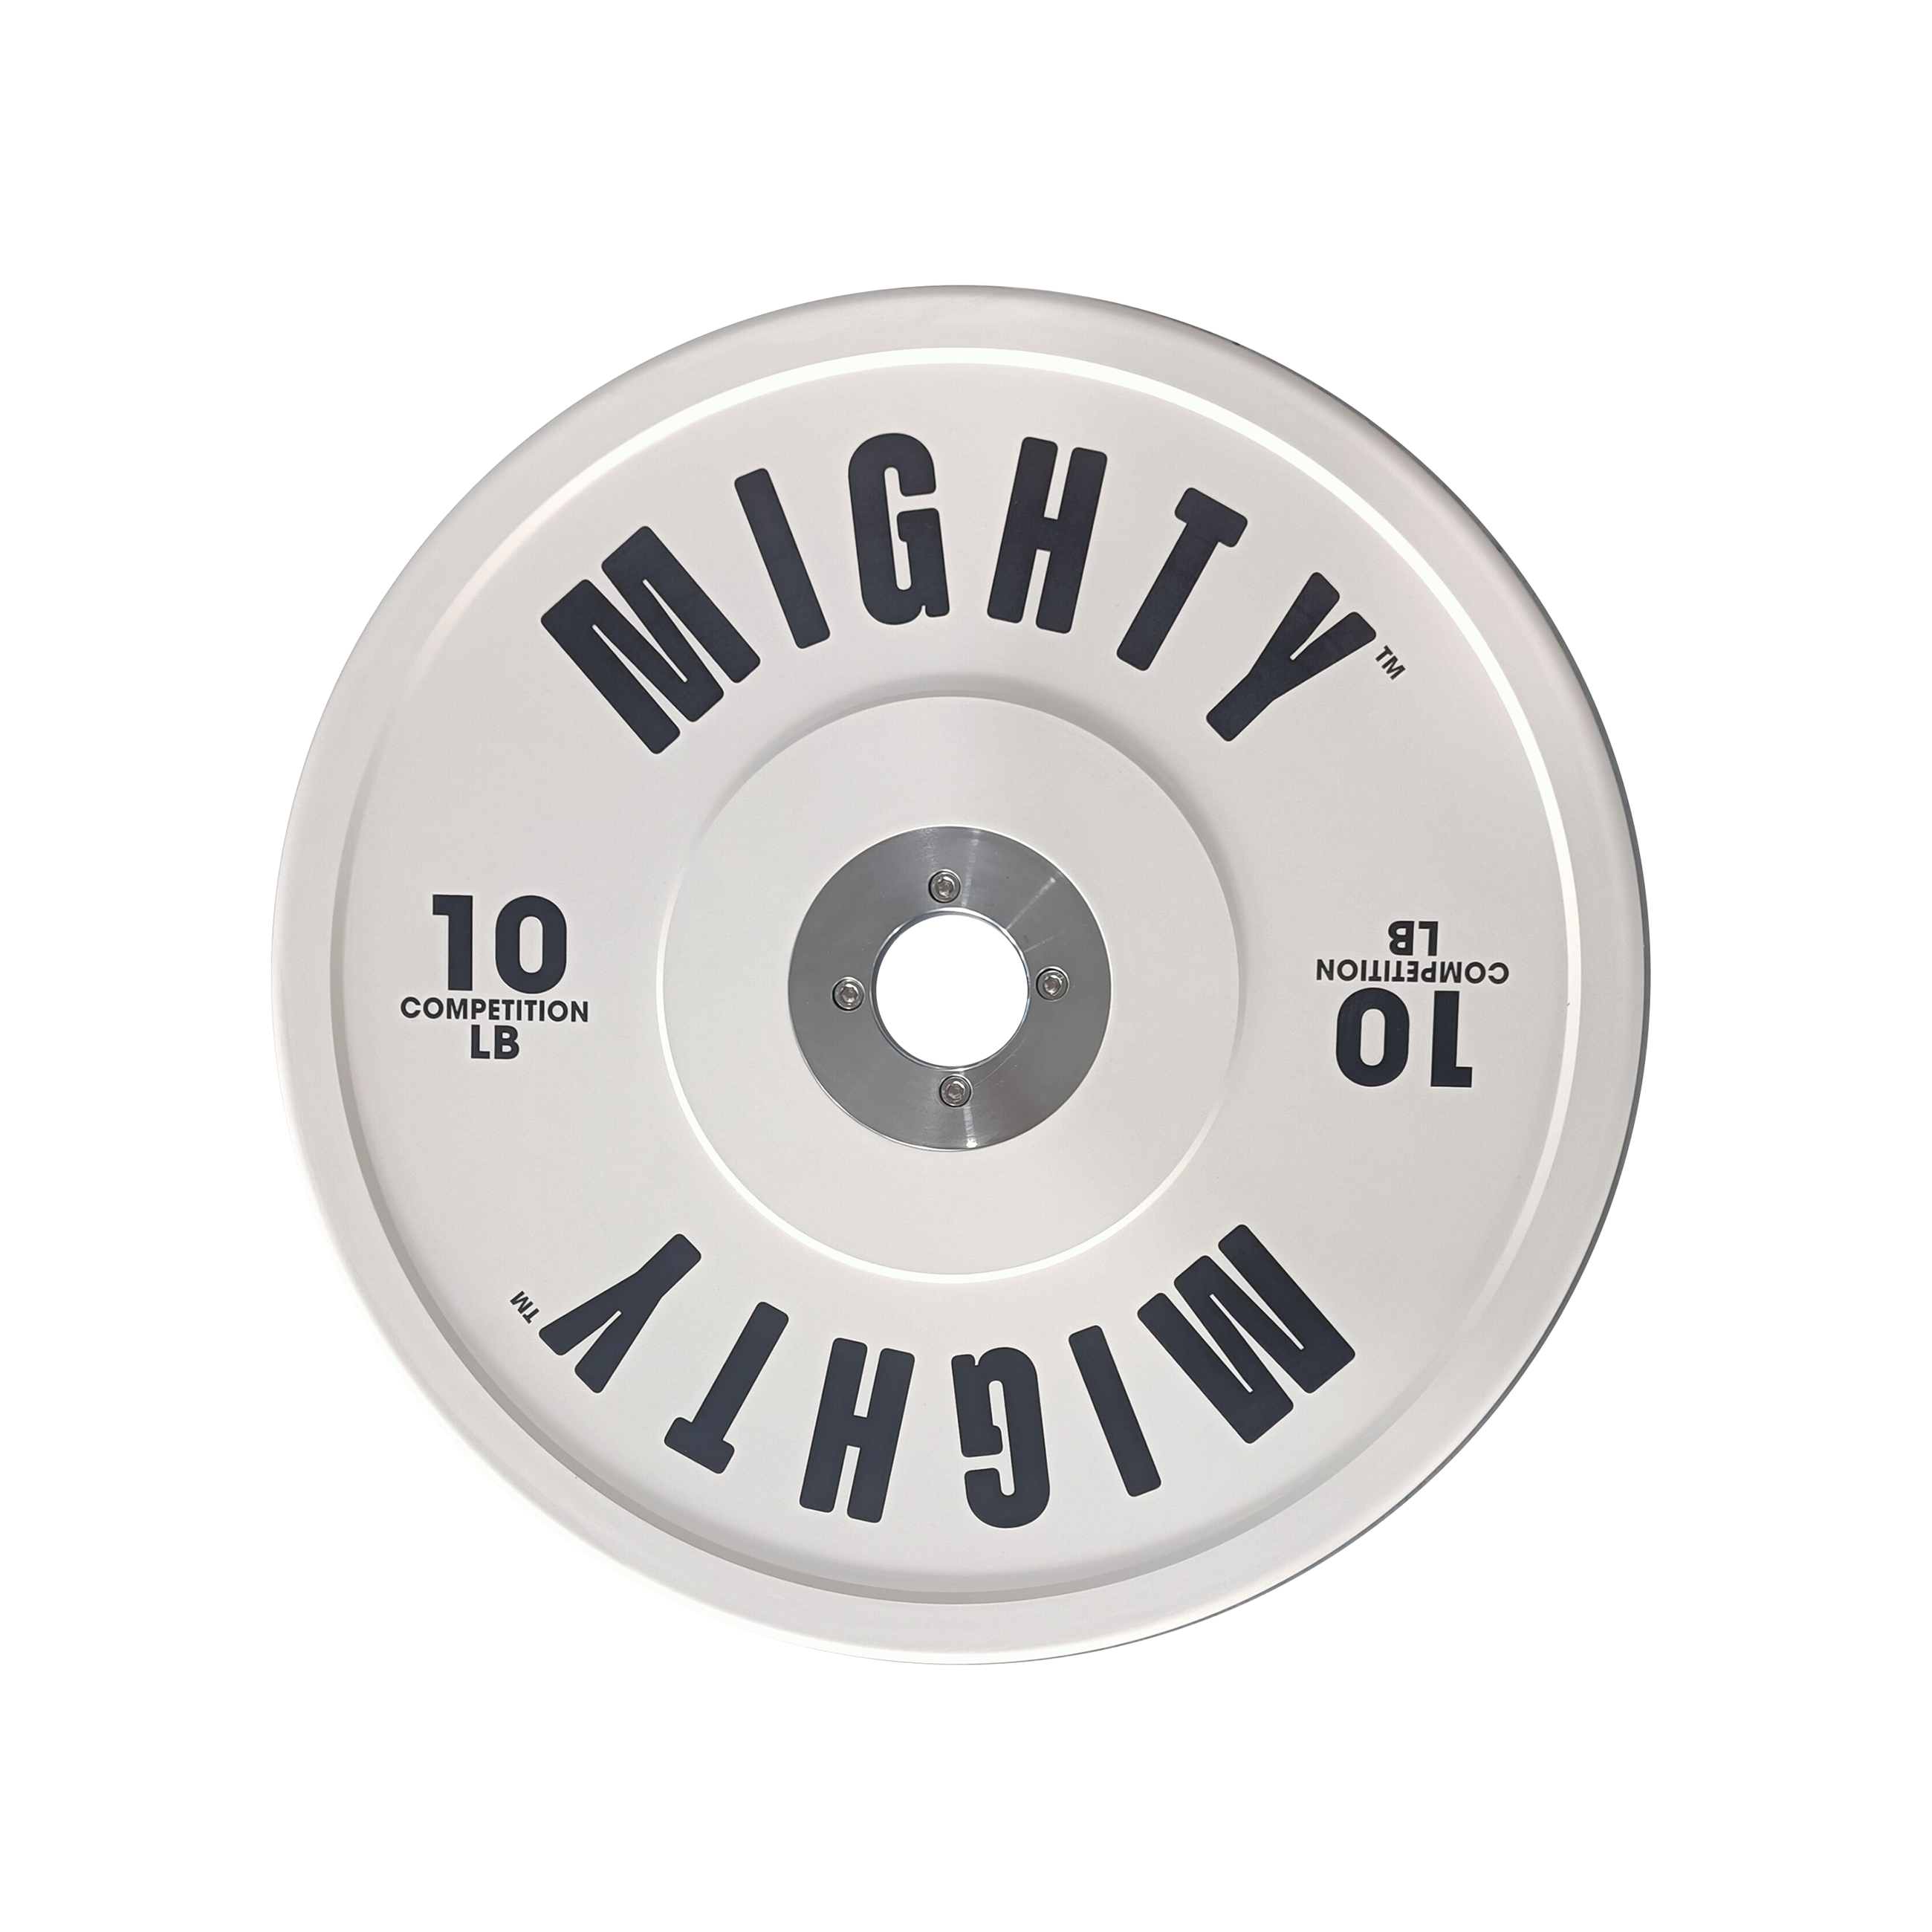 Mighty Competition Bumper Plates - Elite